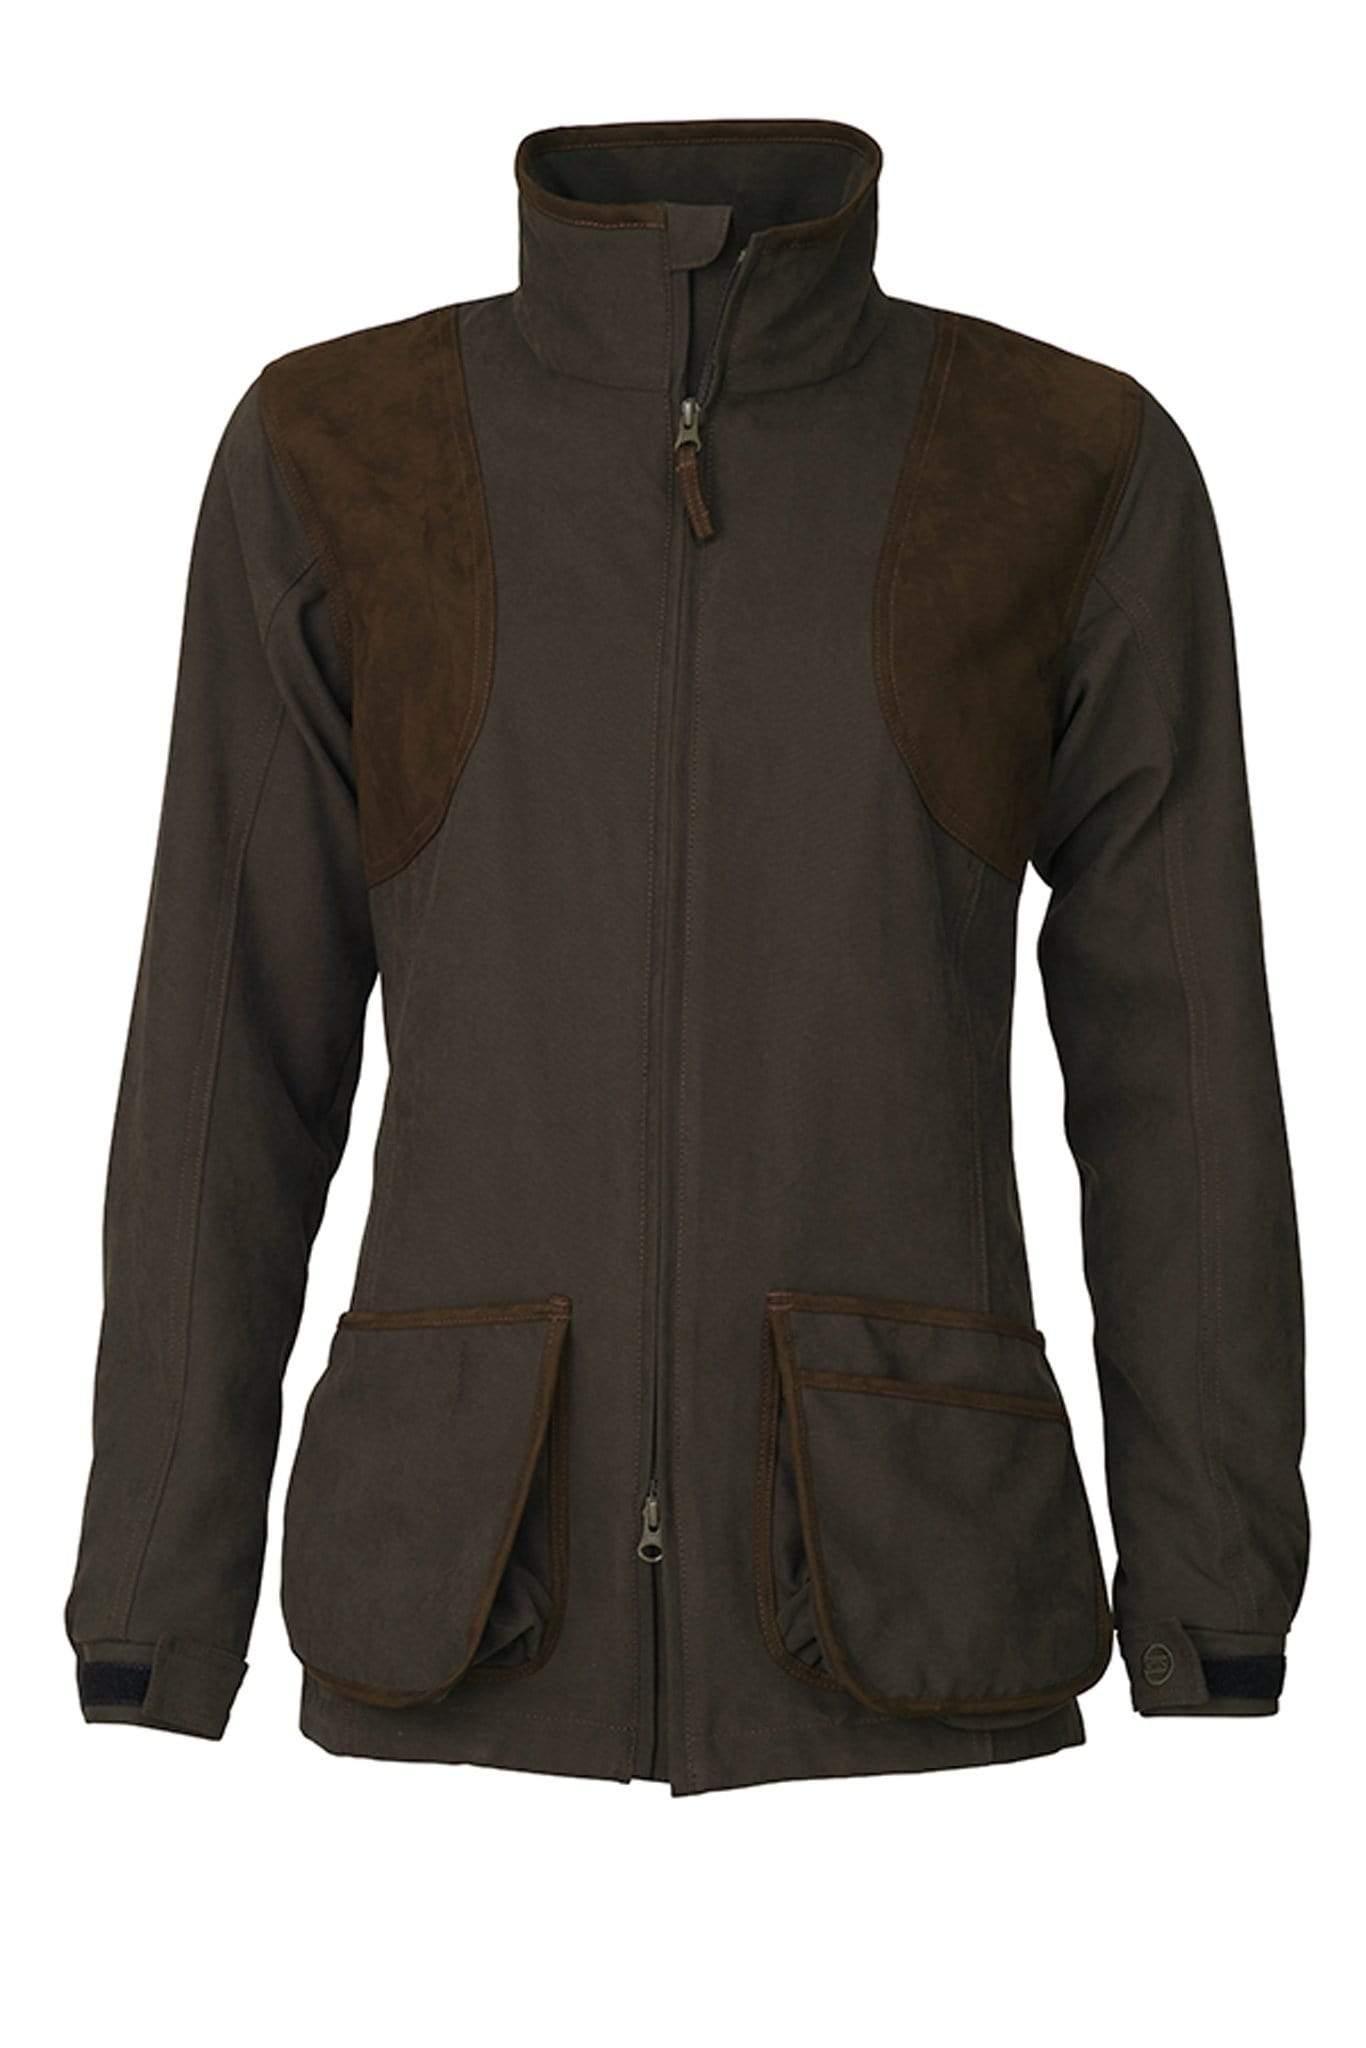 Laksen Technical Coats Laksen Clay Pro Jacket Ladies with CTX Olive